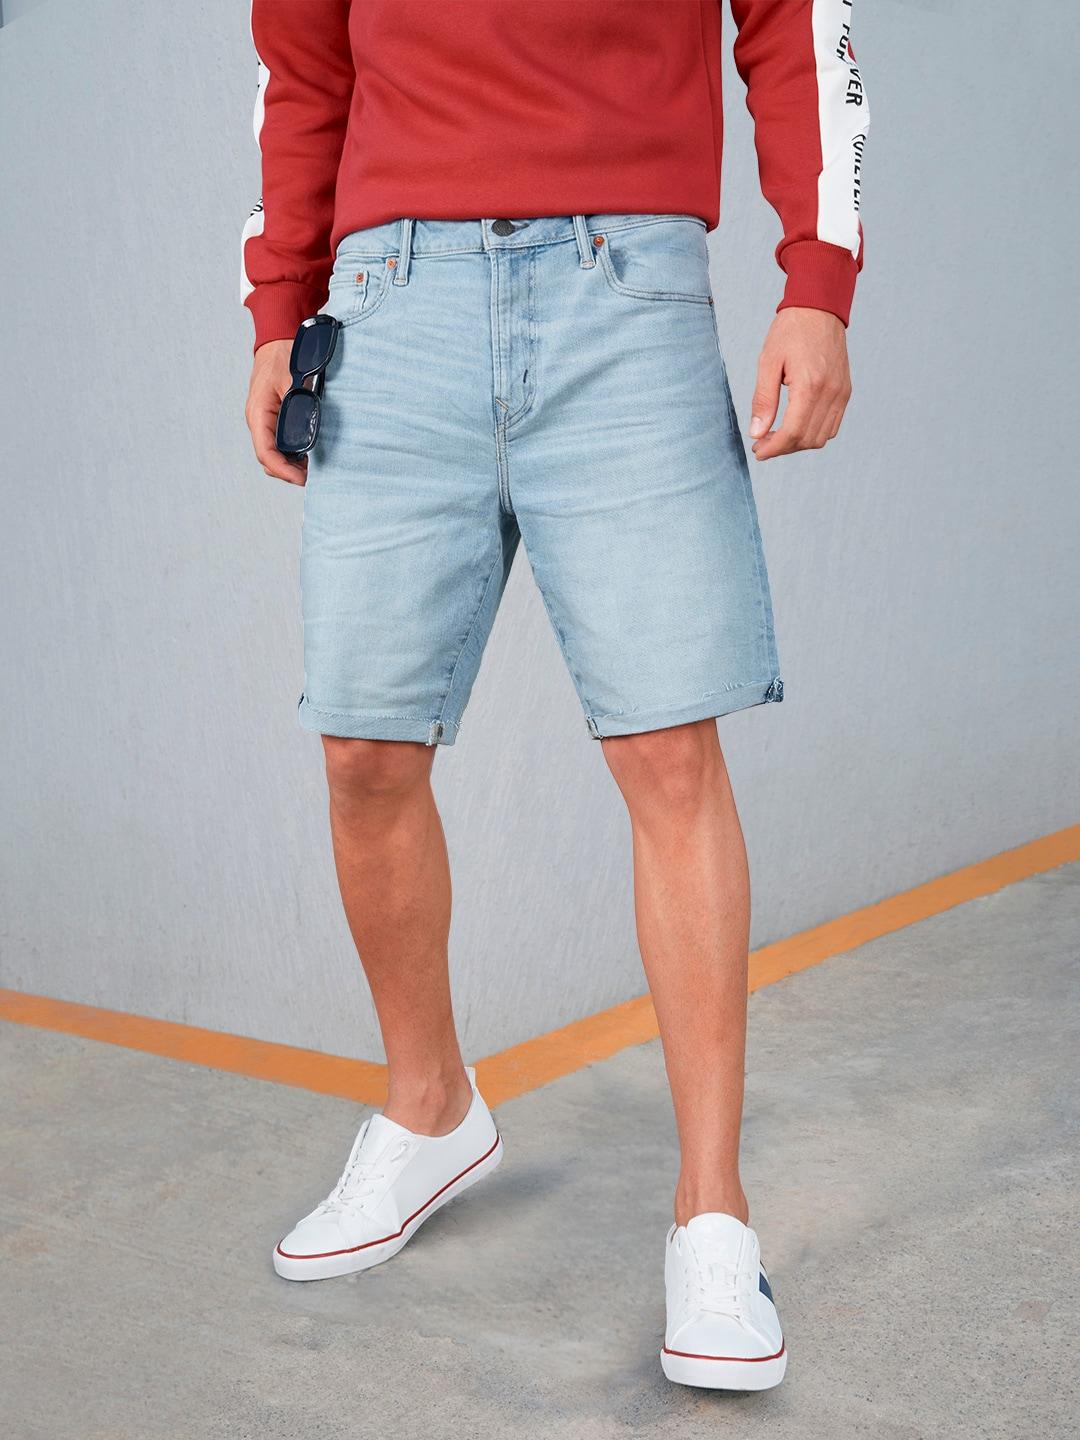 american-eagle-outfitters-men-blue-washed-denim-shorts